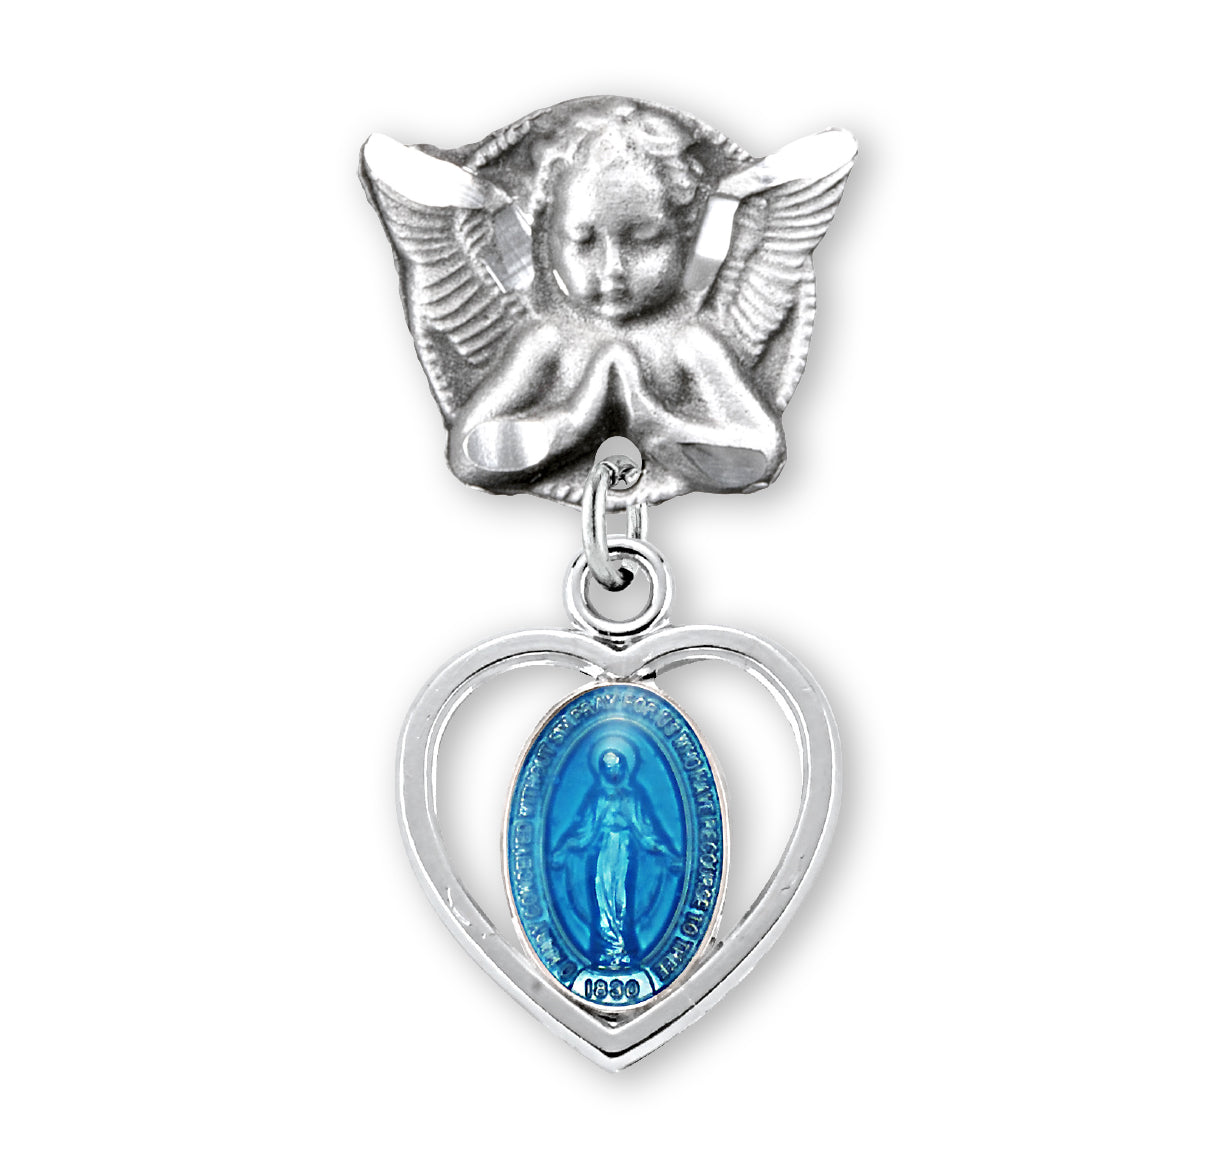 Blue Enameled Pierced Heart Sterling Silver Baby Miraculous Medal on an Angel Pin